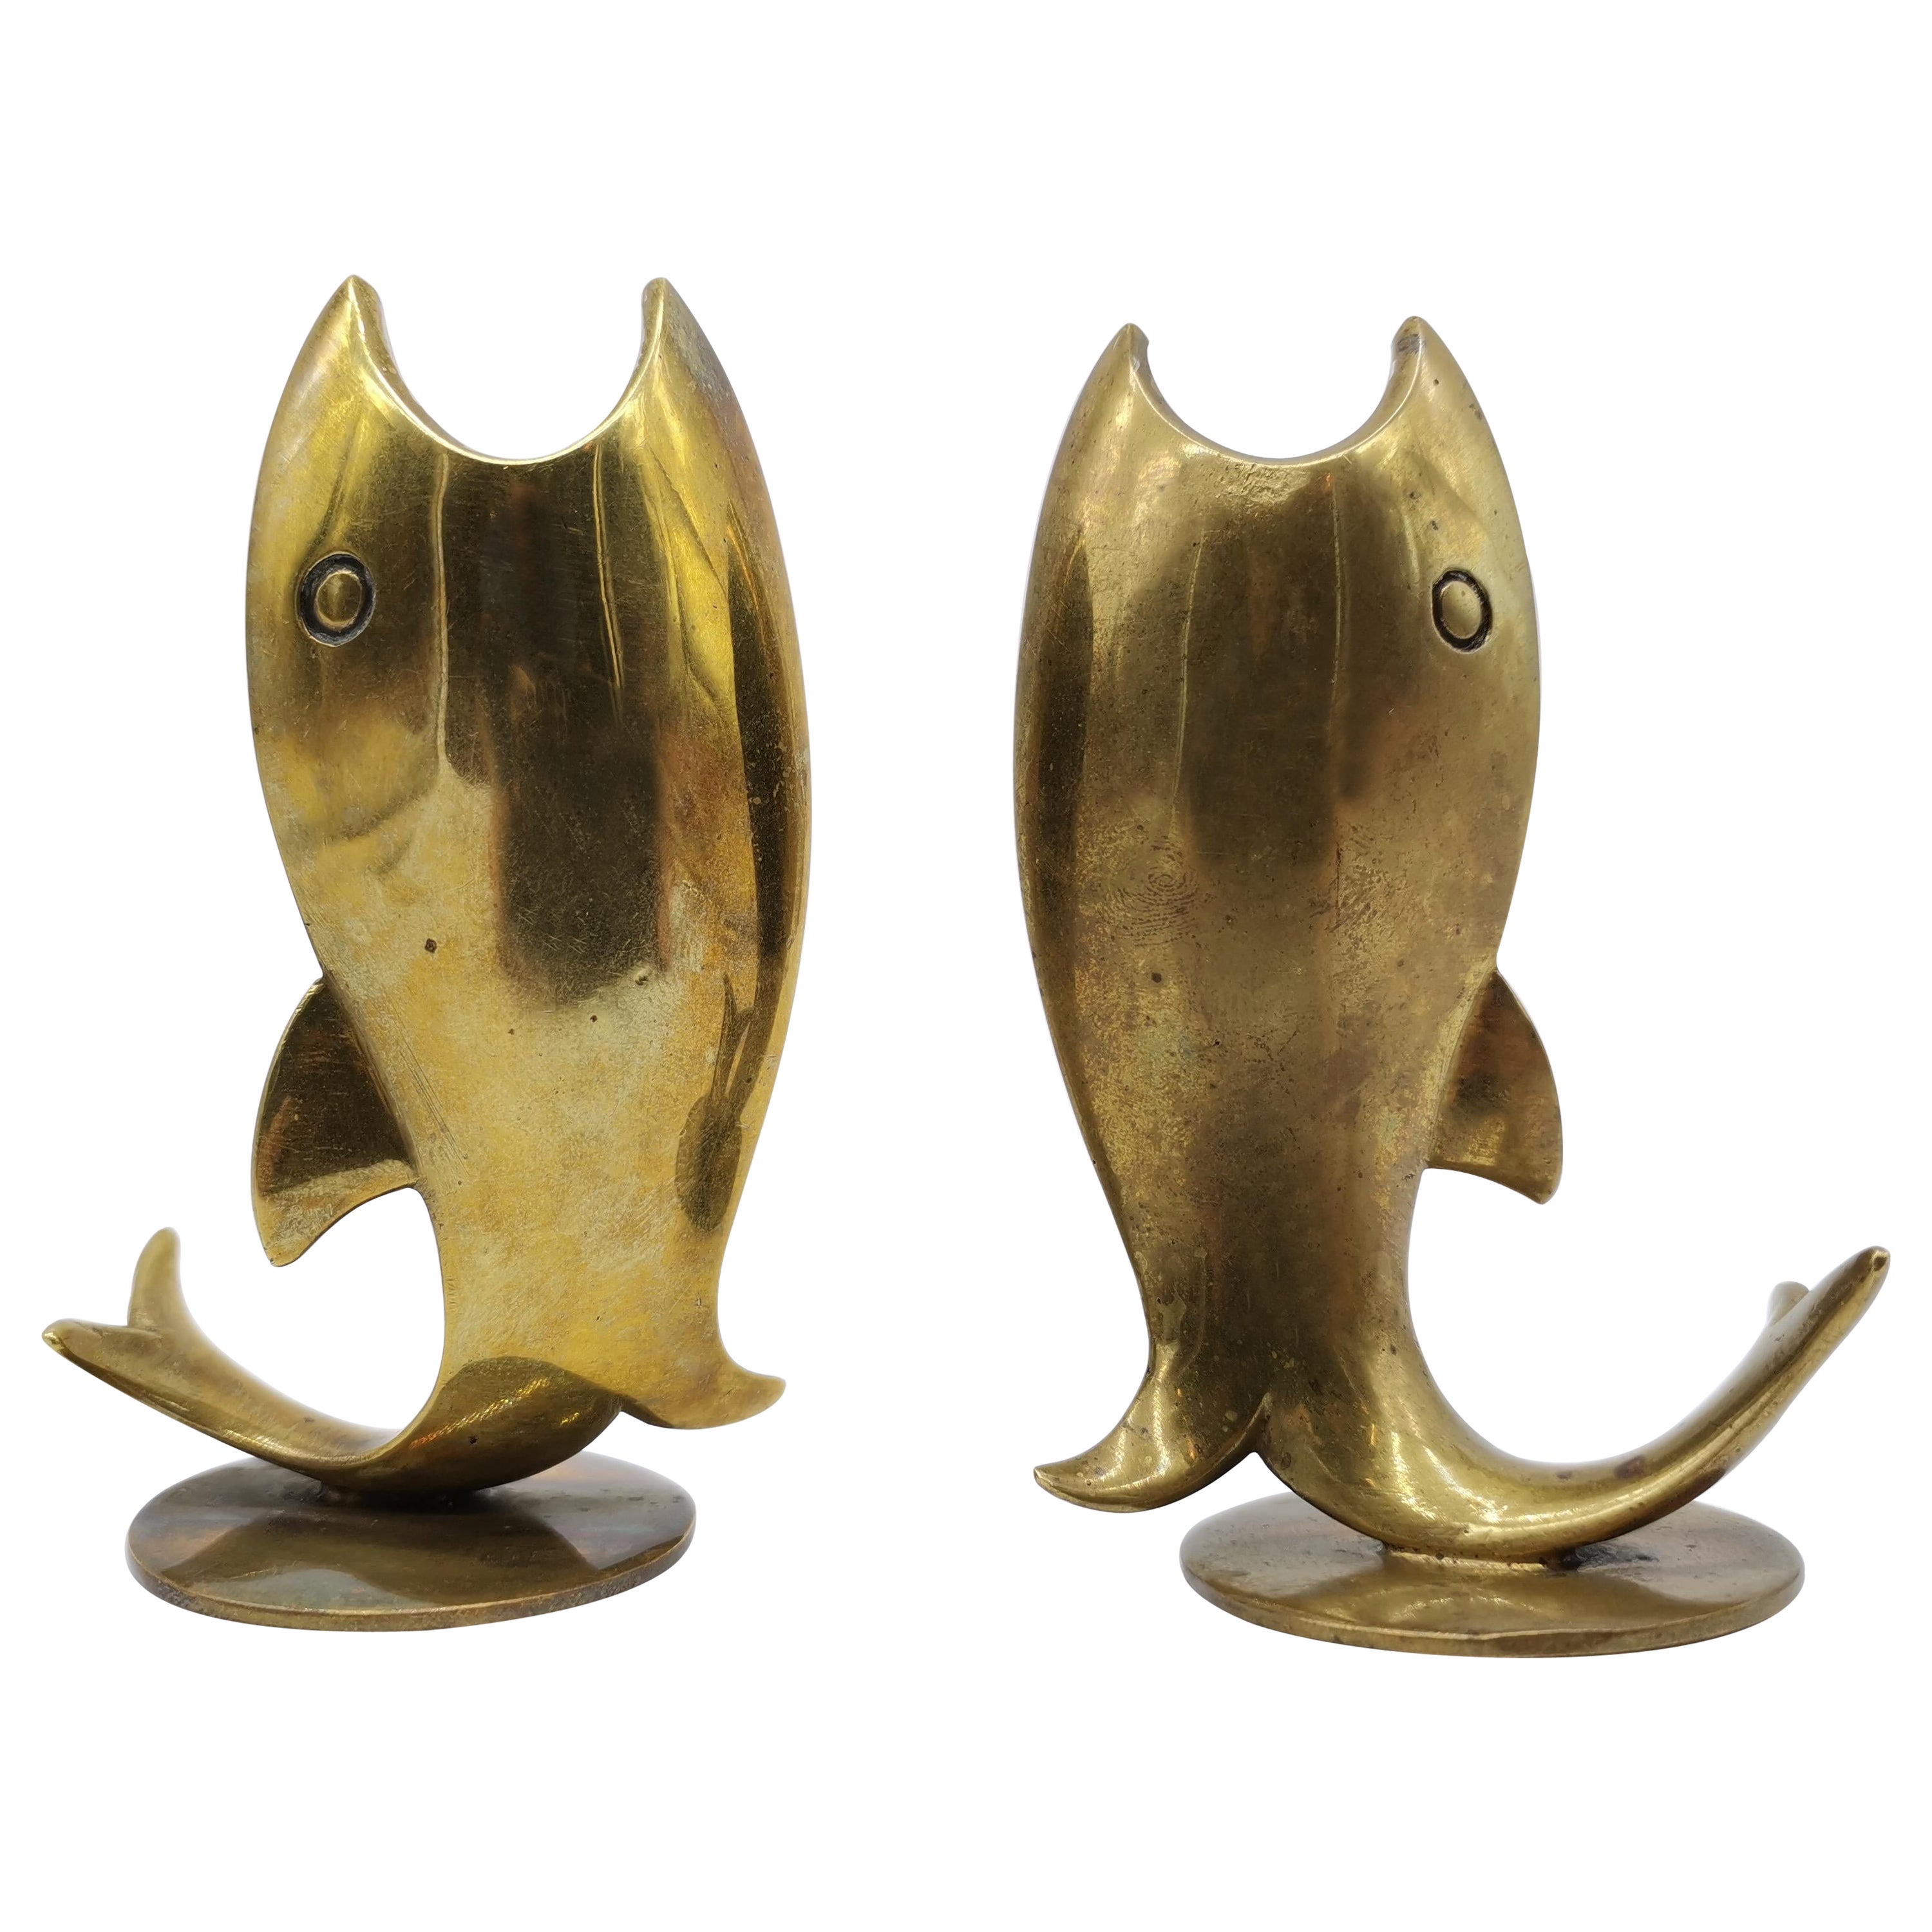 Two Candle Holders in Fish Look, Brass, by Richard Rohac Vienna, Austria